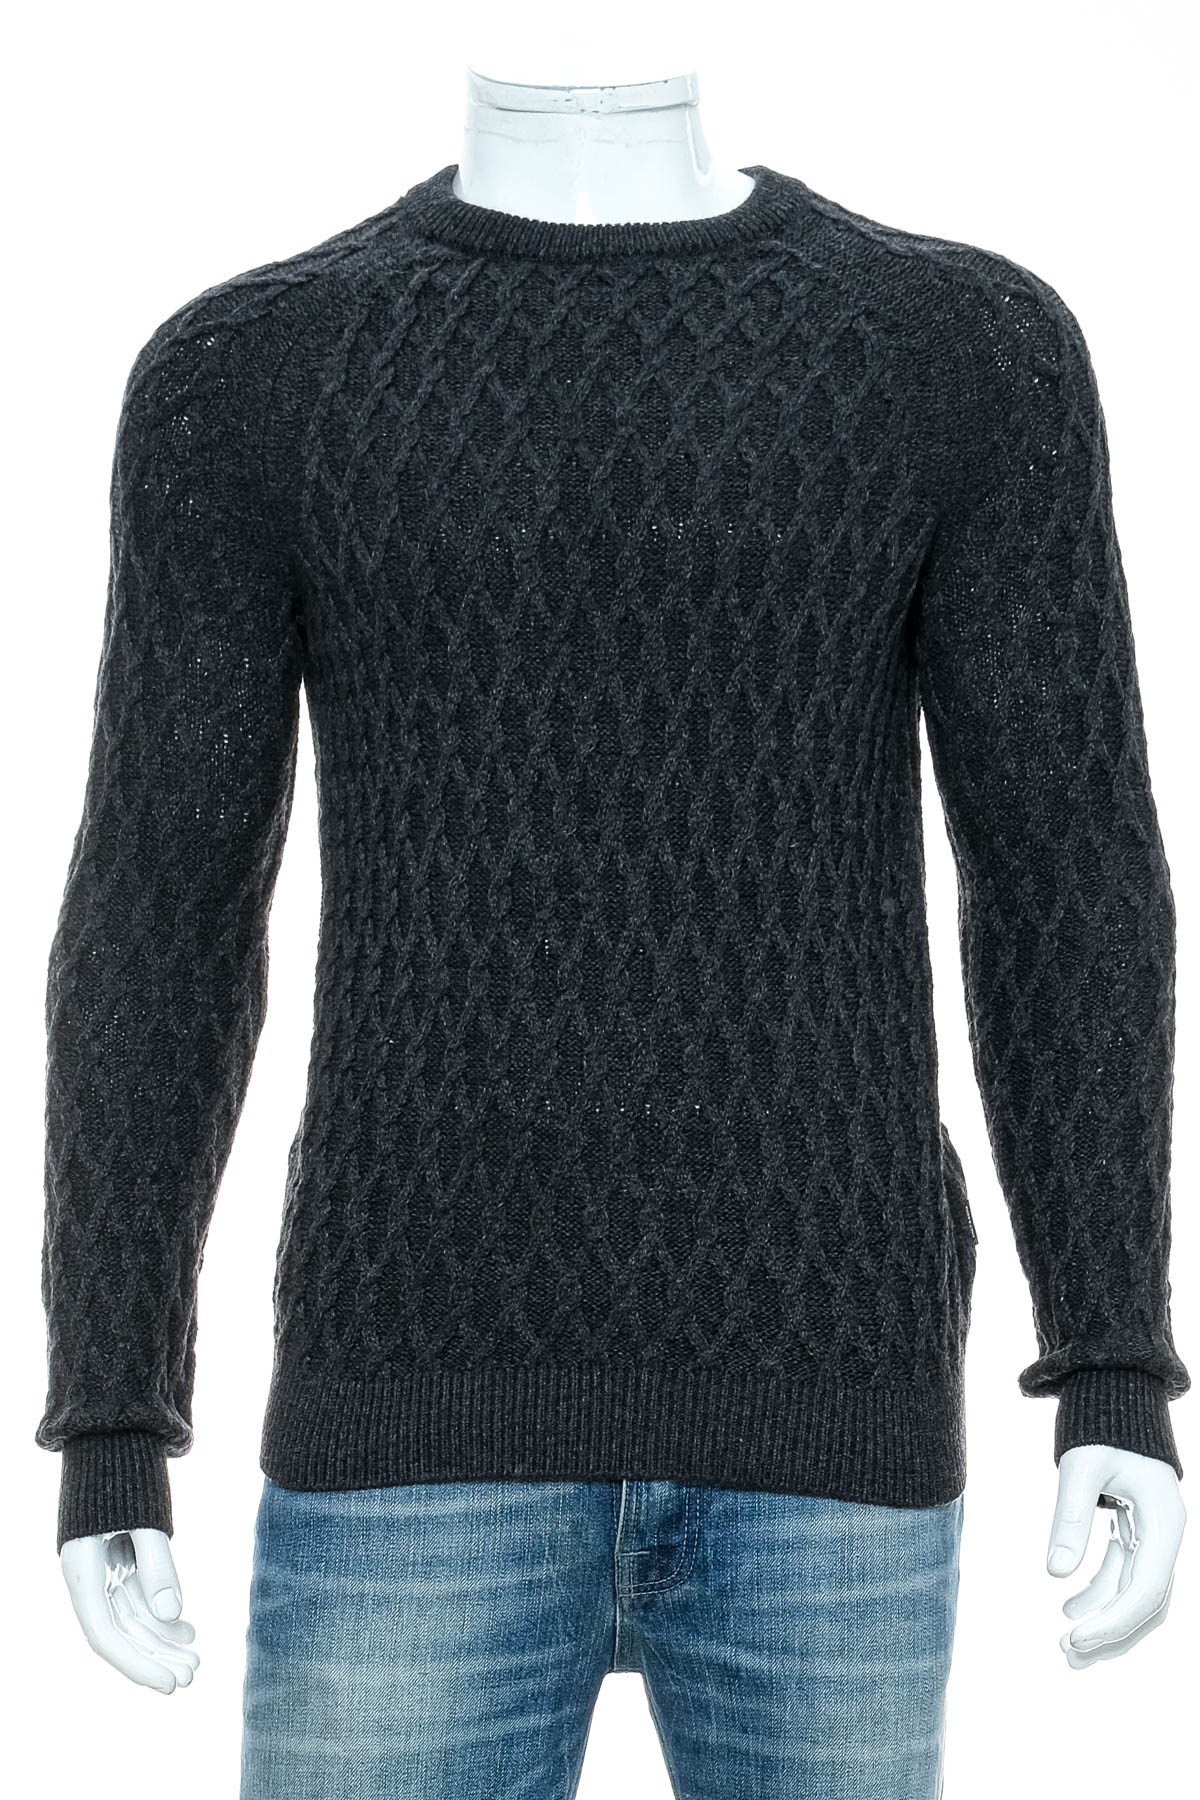 Men's sweater - ONLY & SONS - 0